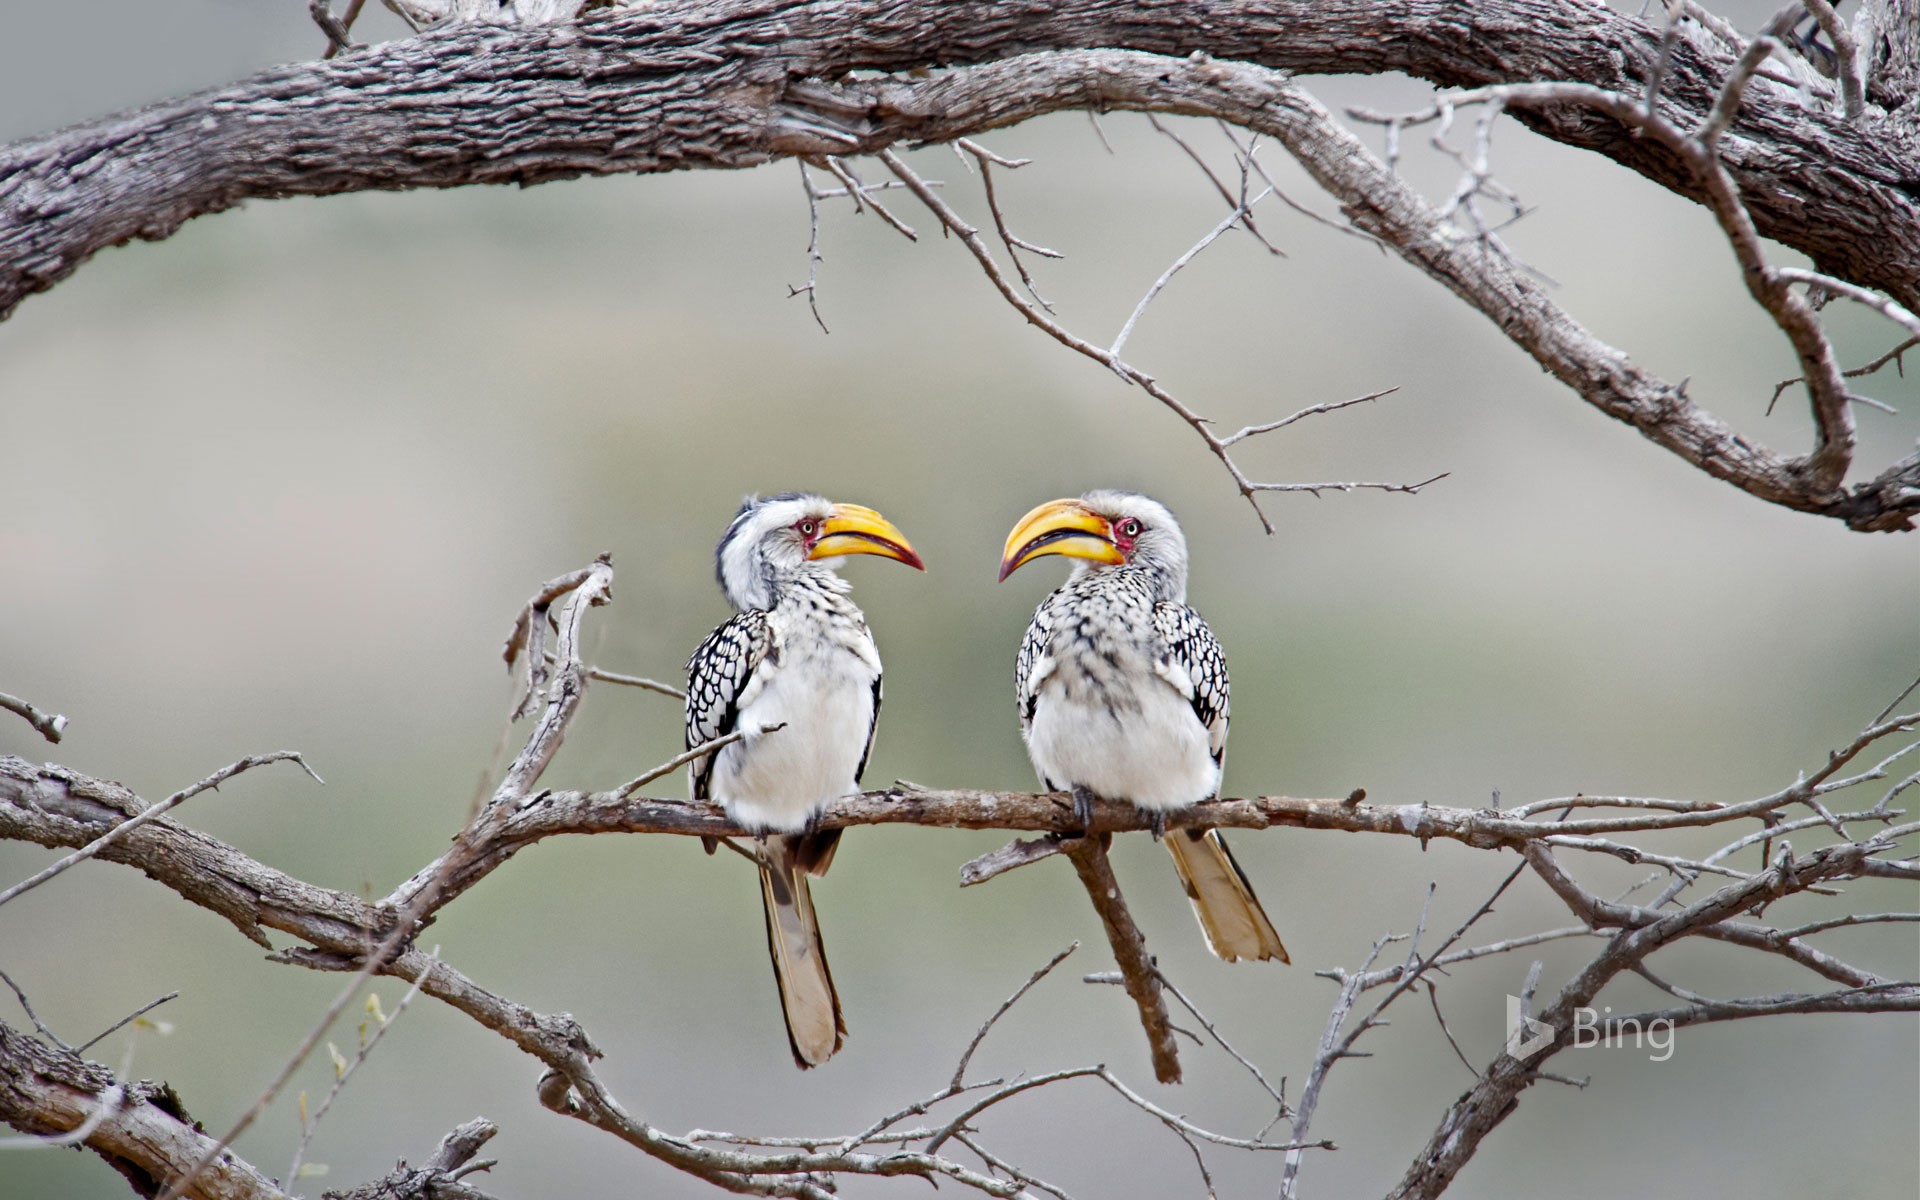 Southern yellow-billed hornbills in Kruger National Park, South Africa